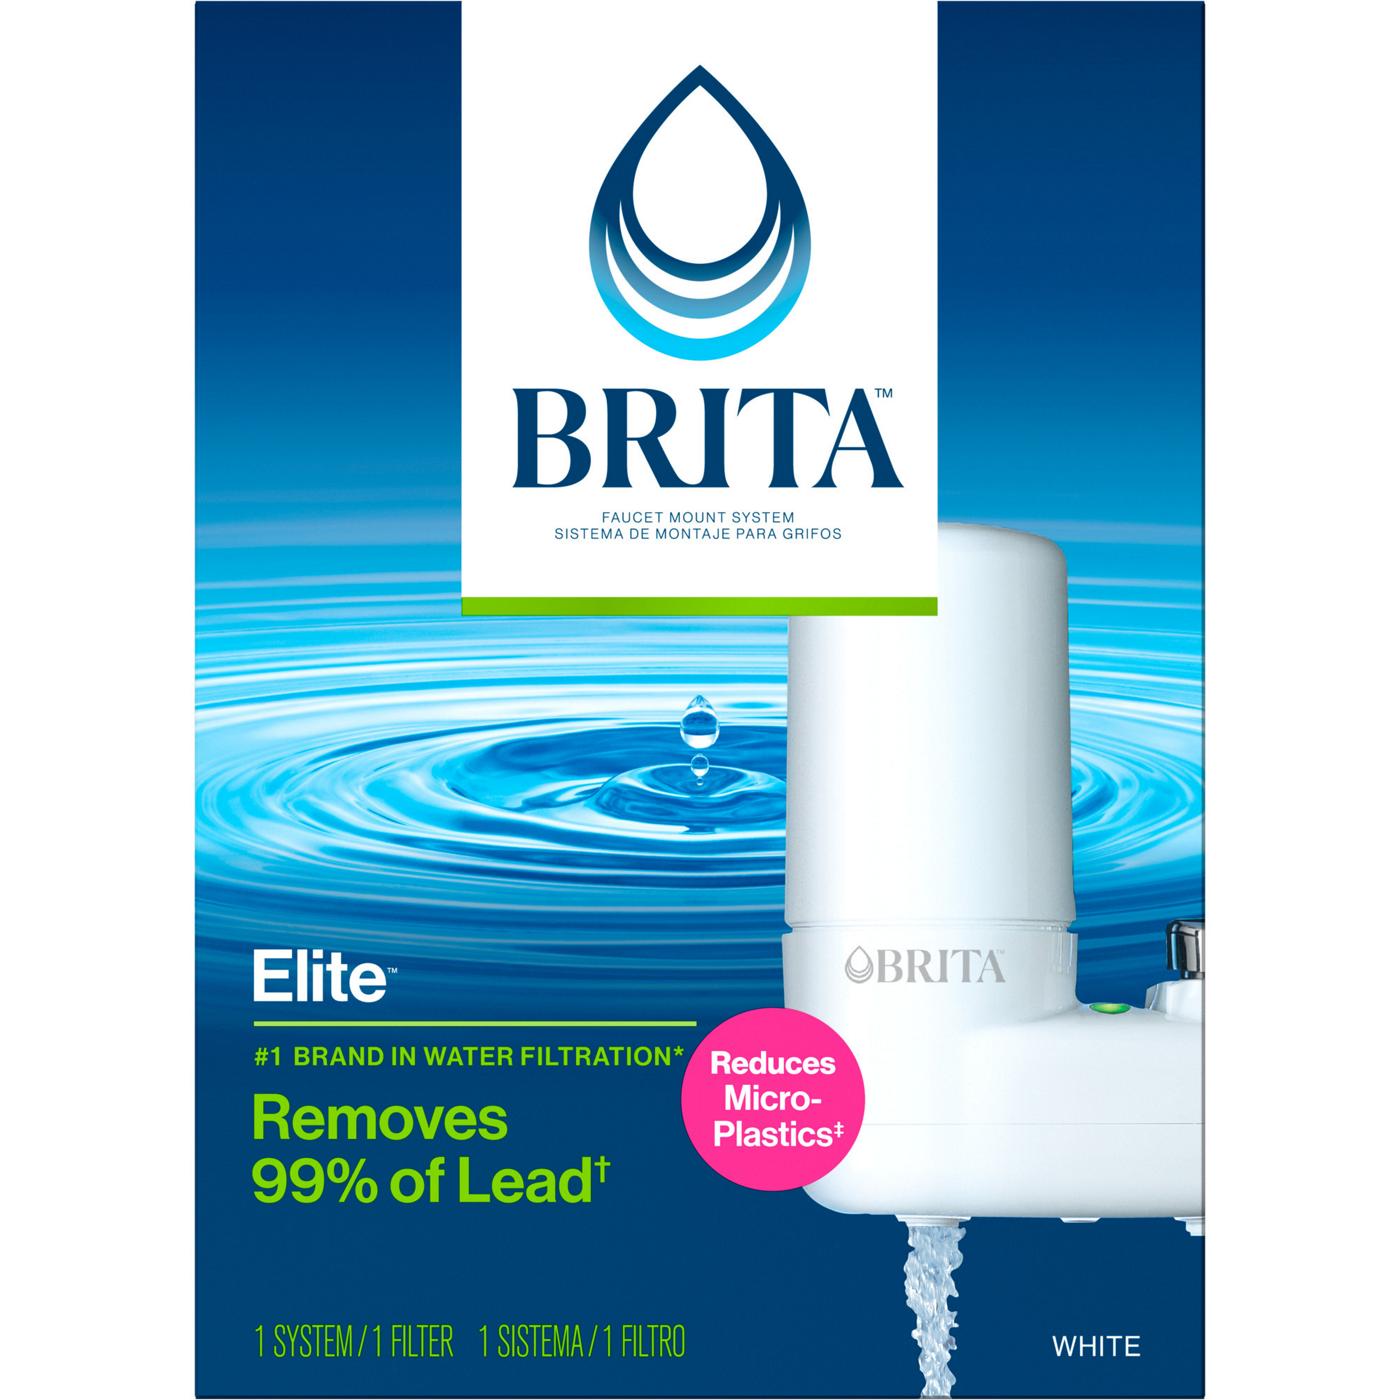 Brita Basic Faucet Mount Water Filtration System; image 1 of 5